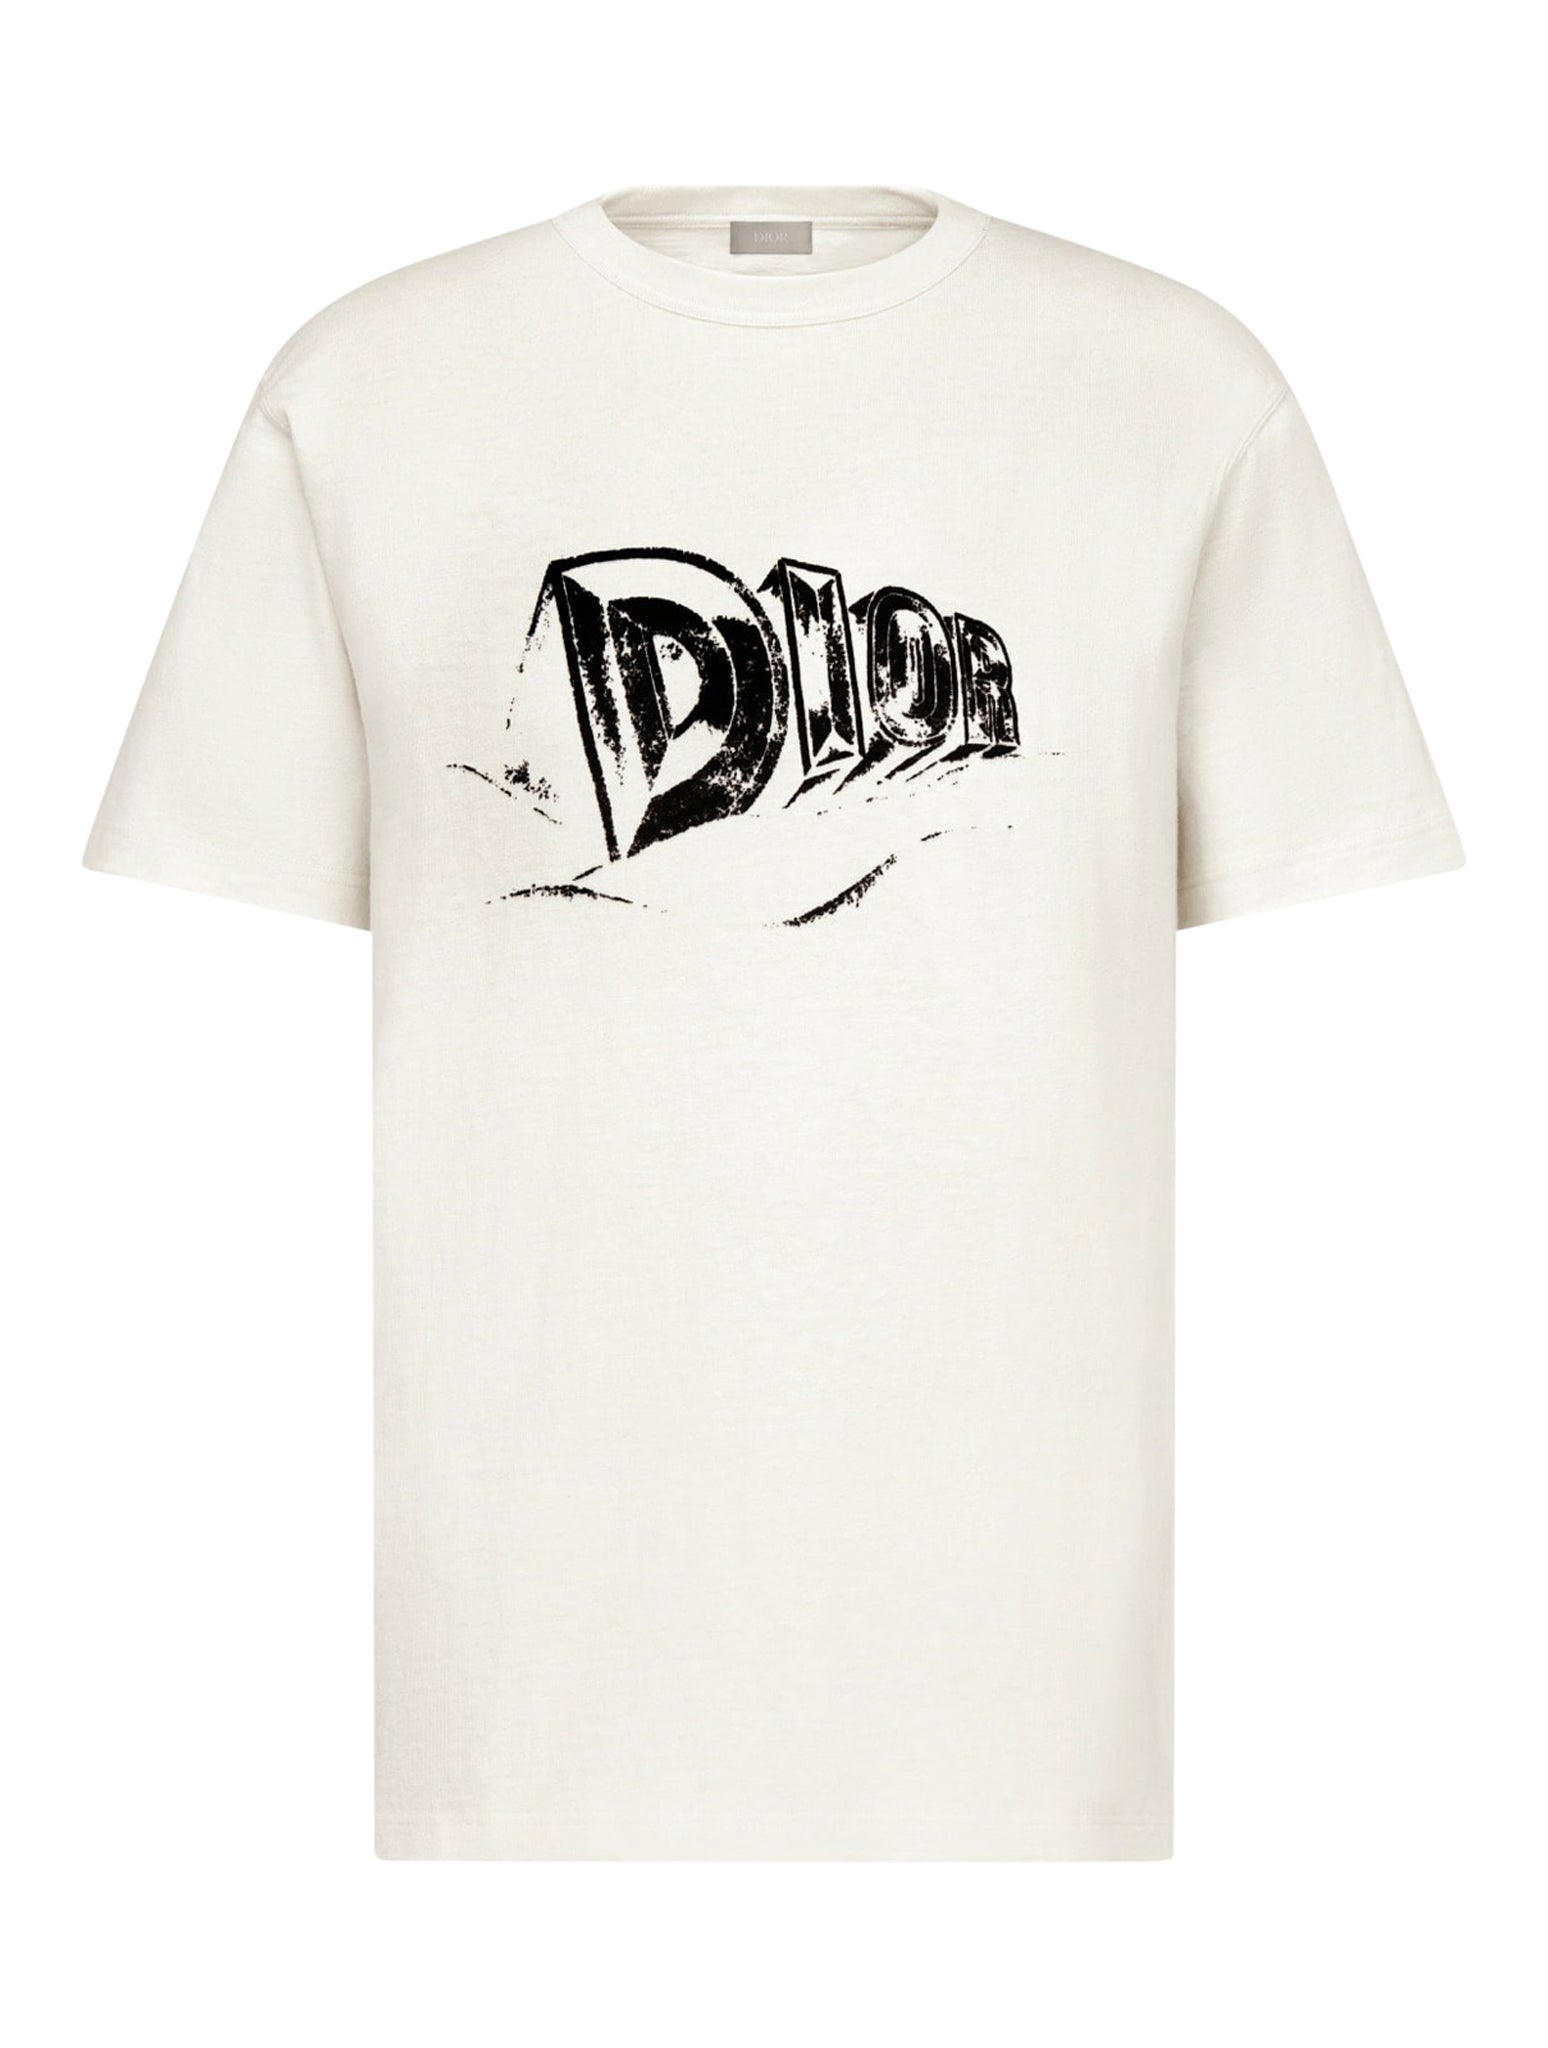 CHRISTIAN DIOR COUTURE T-SHIRT WITH A COMFORTABLE FIT – Suit Negozi Row